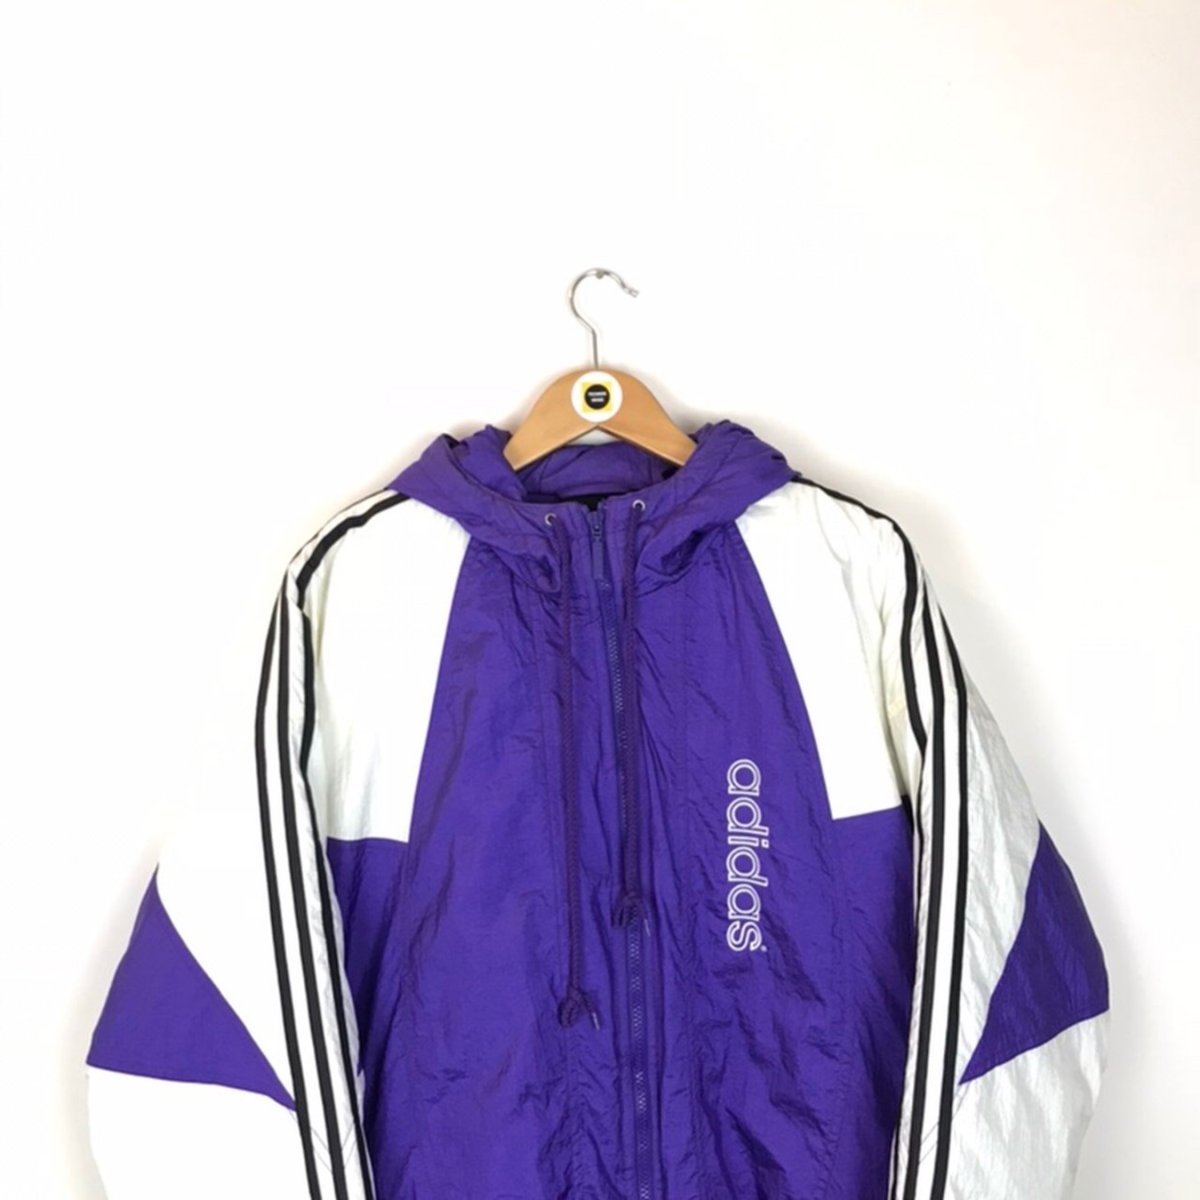 Adidas 80s outfit